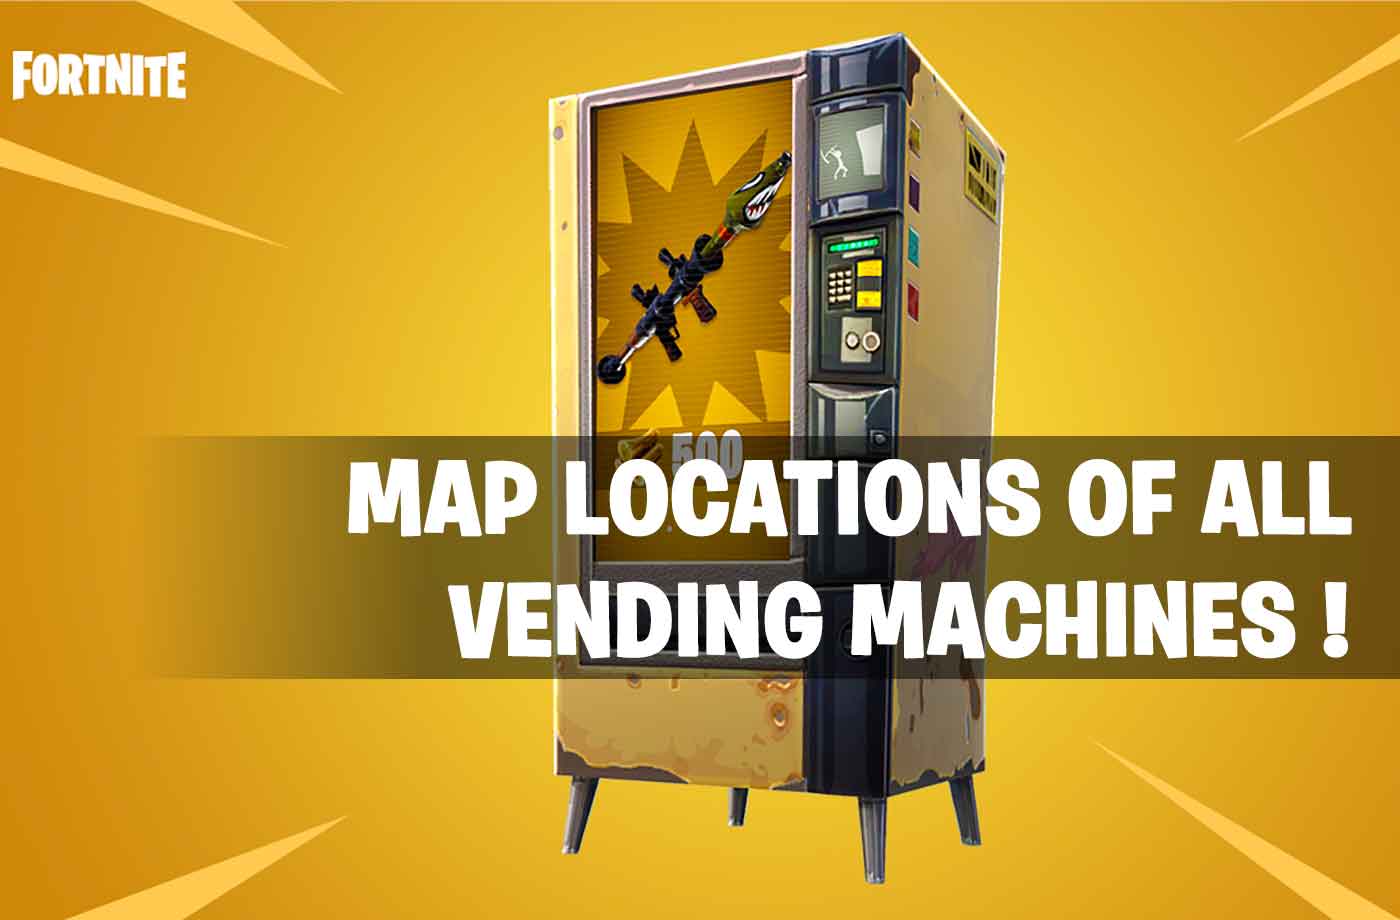 fortnite battle royale map locations of all vending machines - all vending machine locations in fortnite